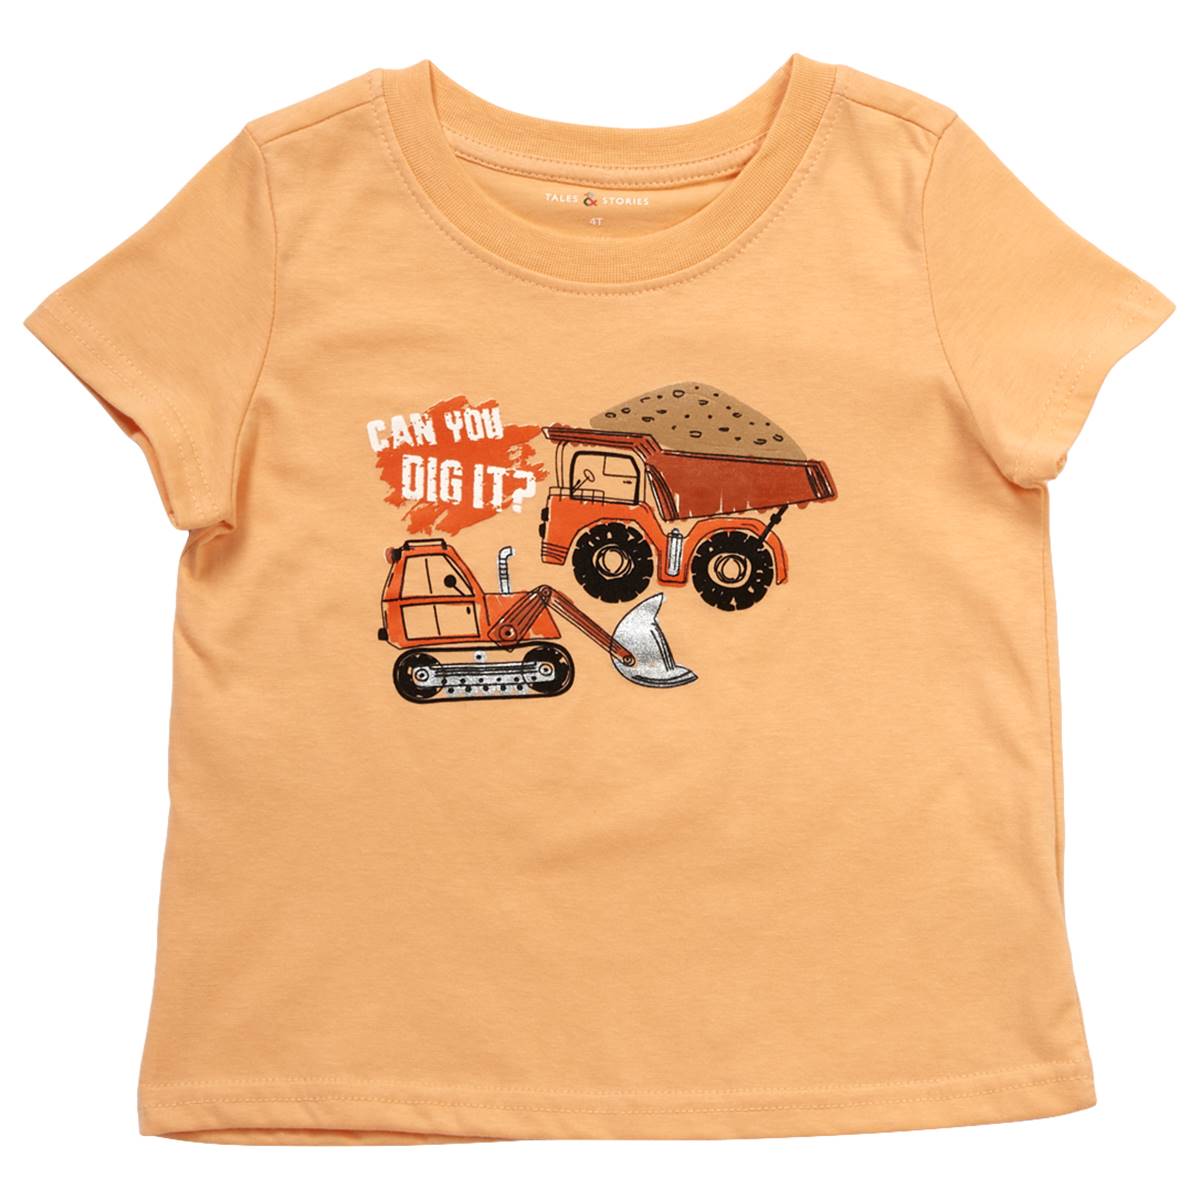 Toddler Boy Tales & Stories Short Sleeve Dig It Graphic Tee